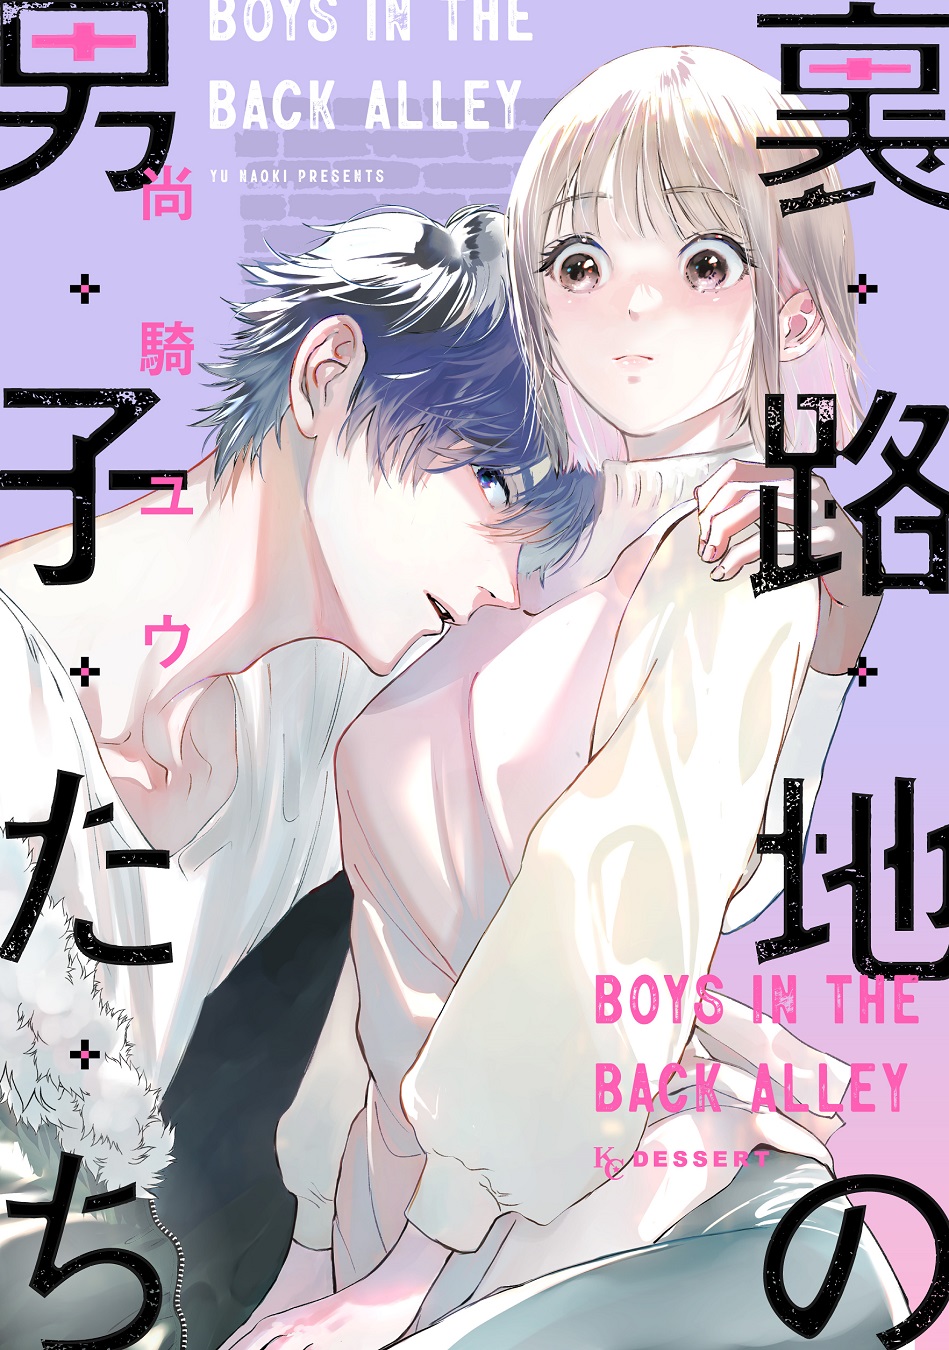 Shoujo In The Back Alley Boys in the Back Alley - MangaDex